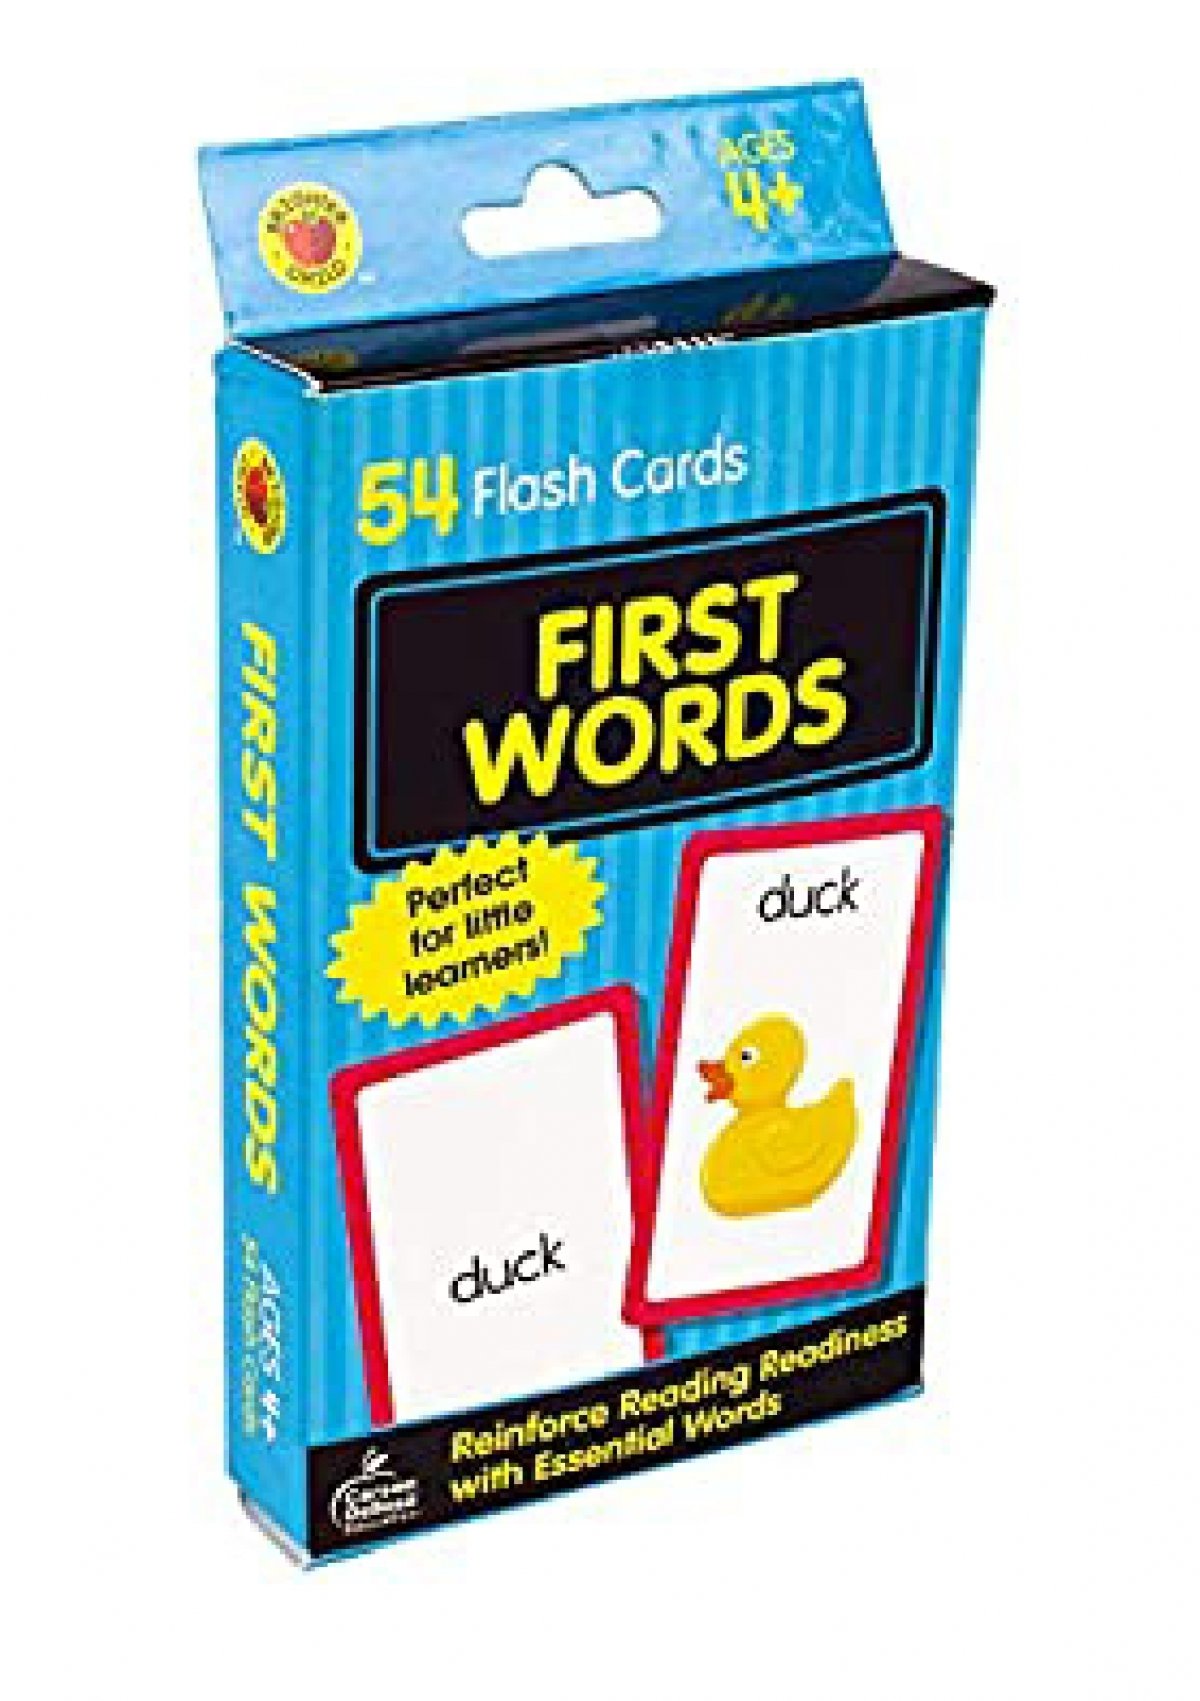 f-r-e-e-d-o-w-n-l-o-a-d-r-e-a-d-carson-dellosa-first-words-flash-cards-54-cards-for